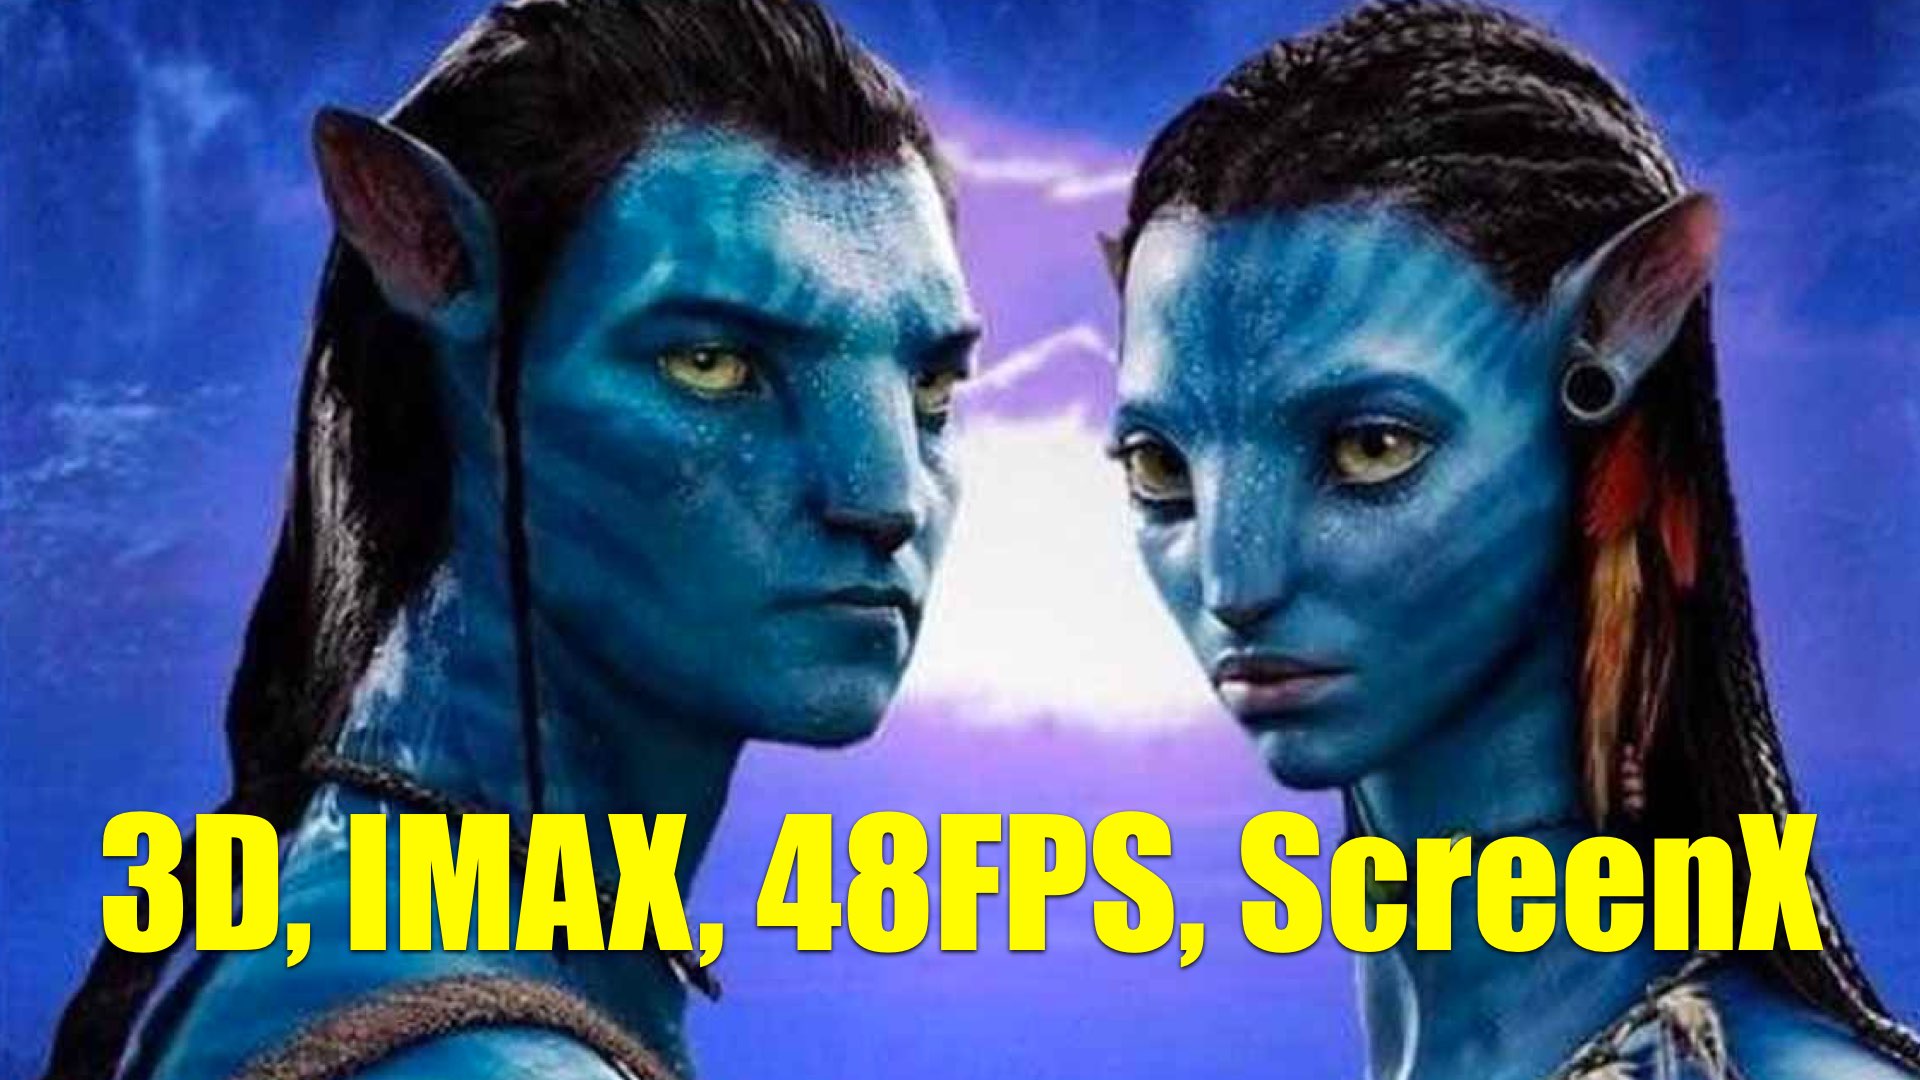 NATO Chief: “There will be more versions of Avatar 2 than any movie in the history of movies”